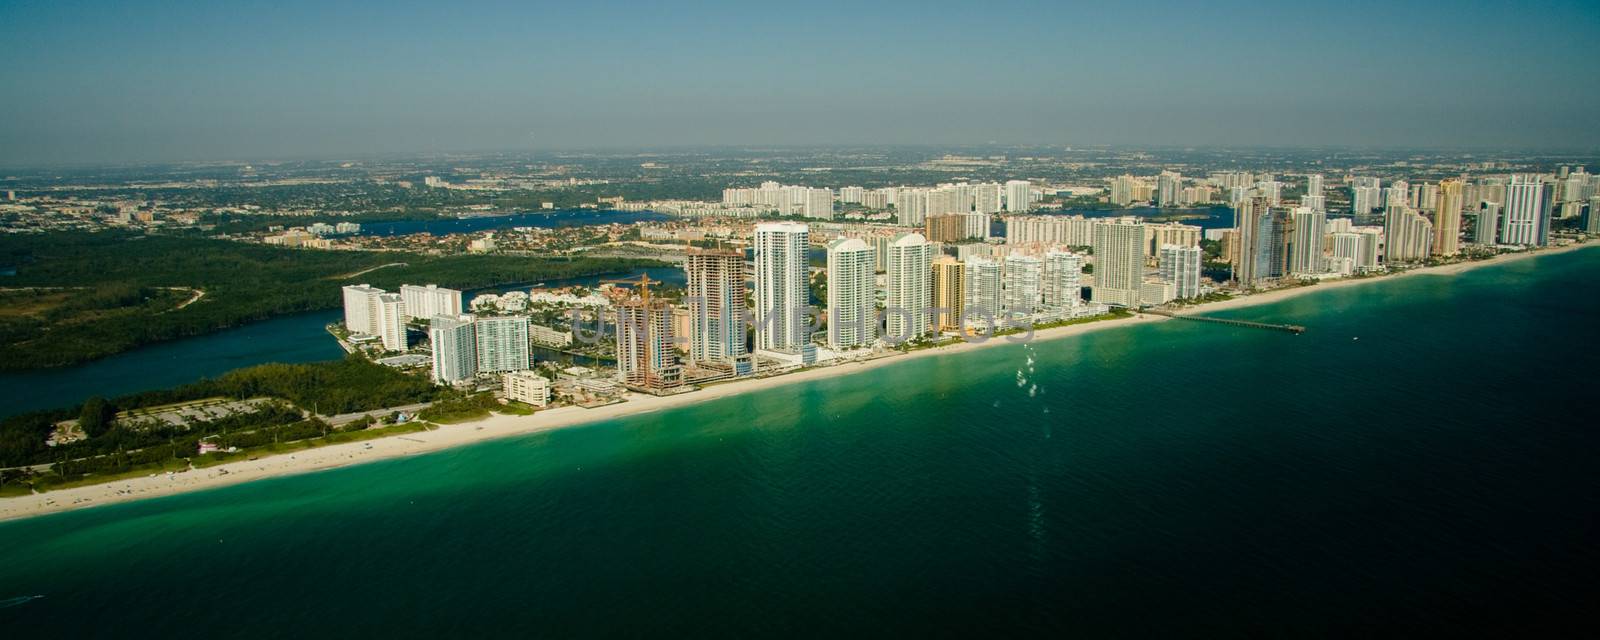 An aerial view of the seashore in Miami with deep green and blue waters.